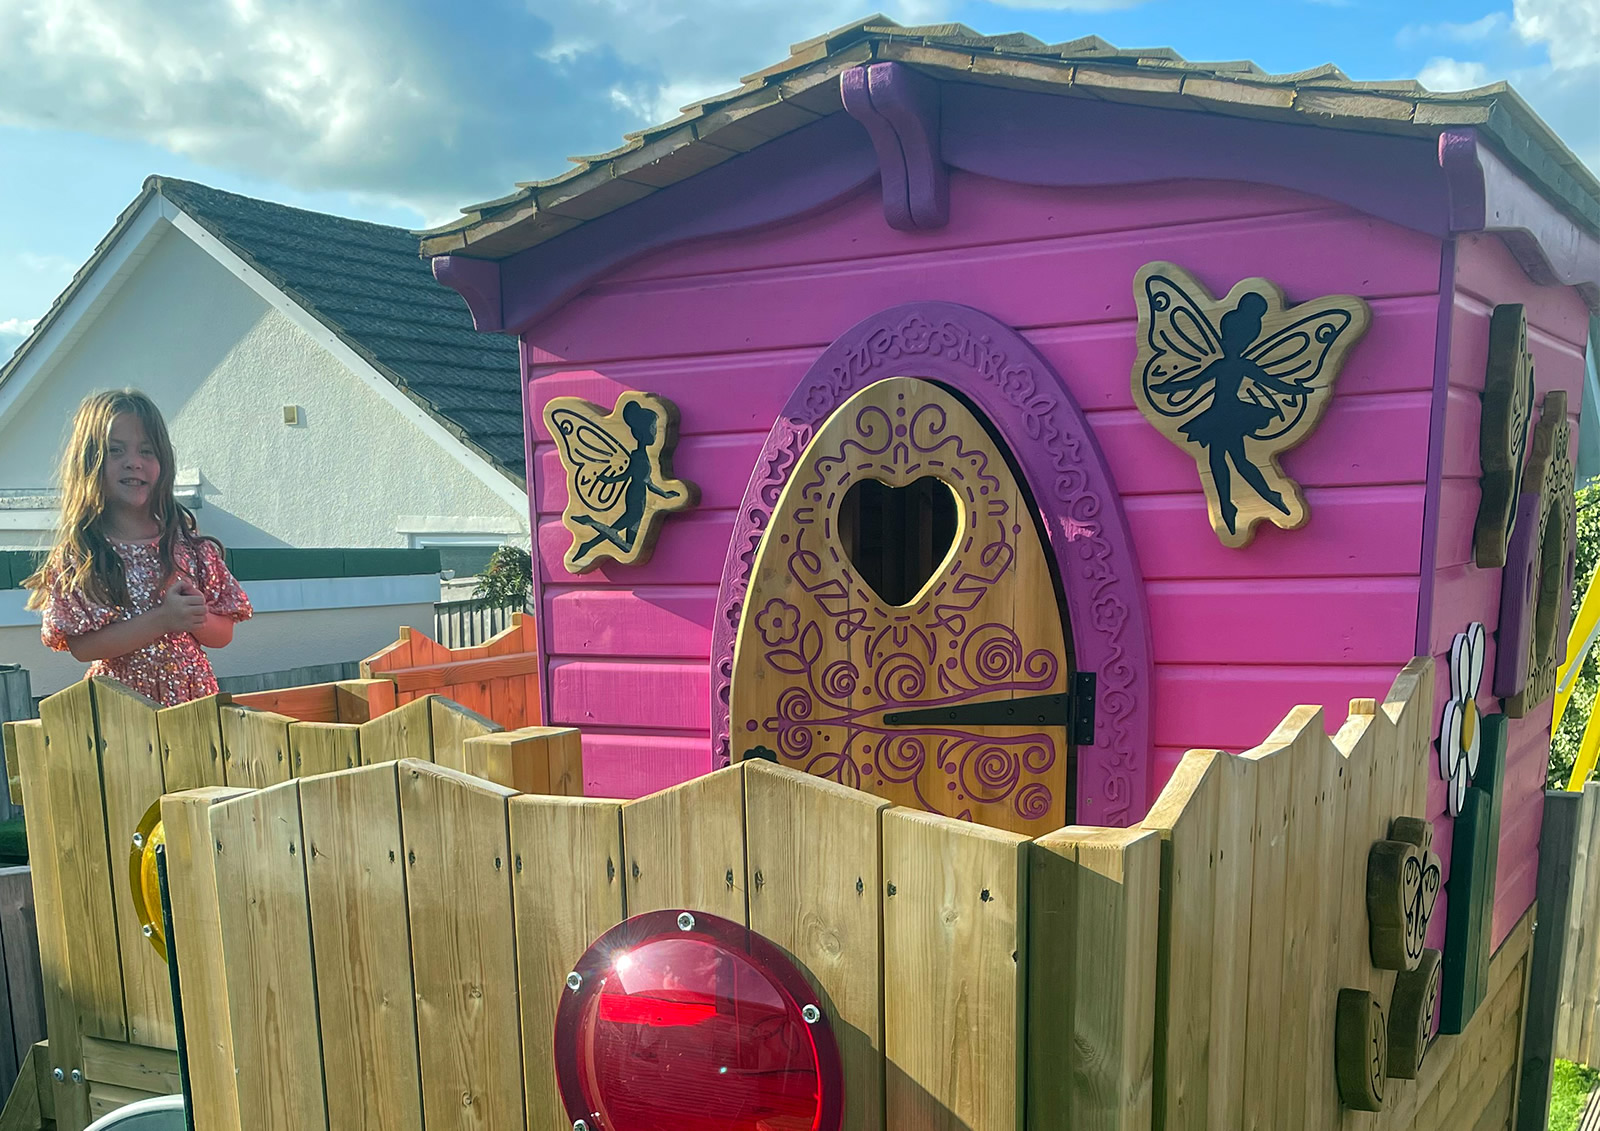 A wooden play house painted in pink adorned with fairies